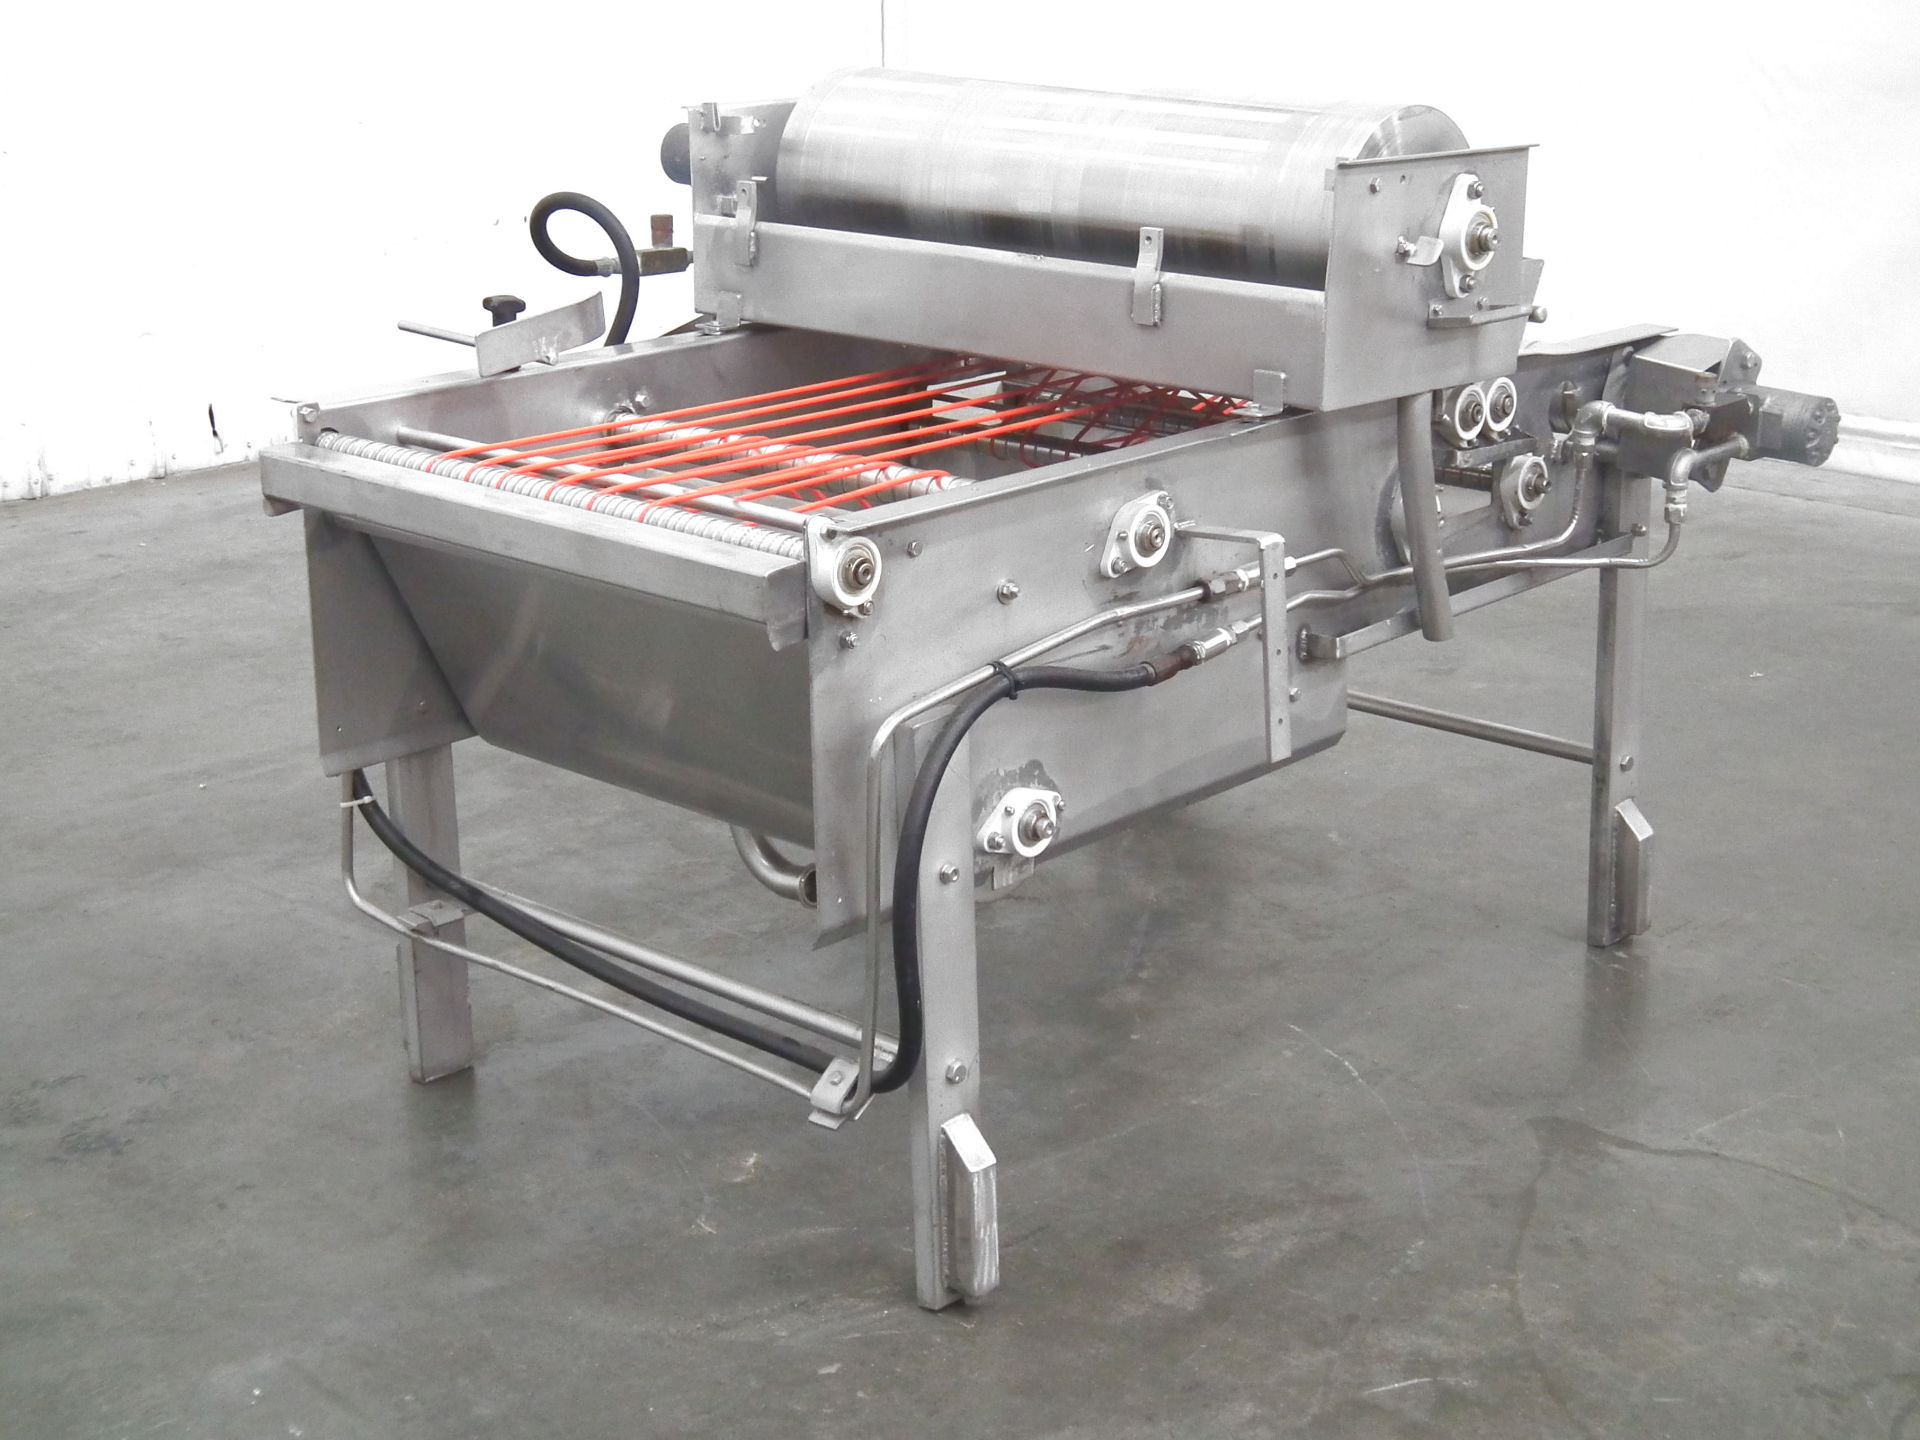 Holmatic Pizza Sauce Applicator A9764 - Image 2 of 6